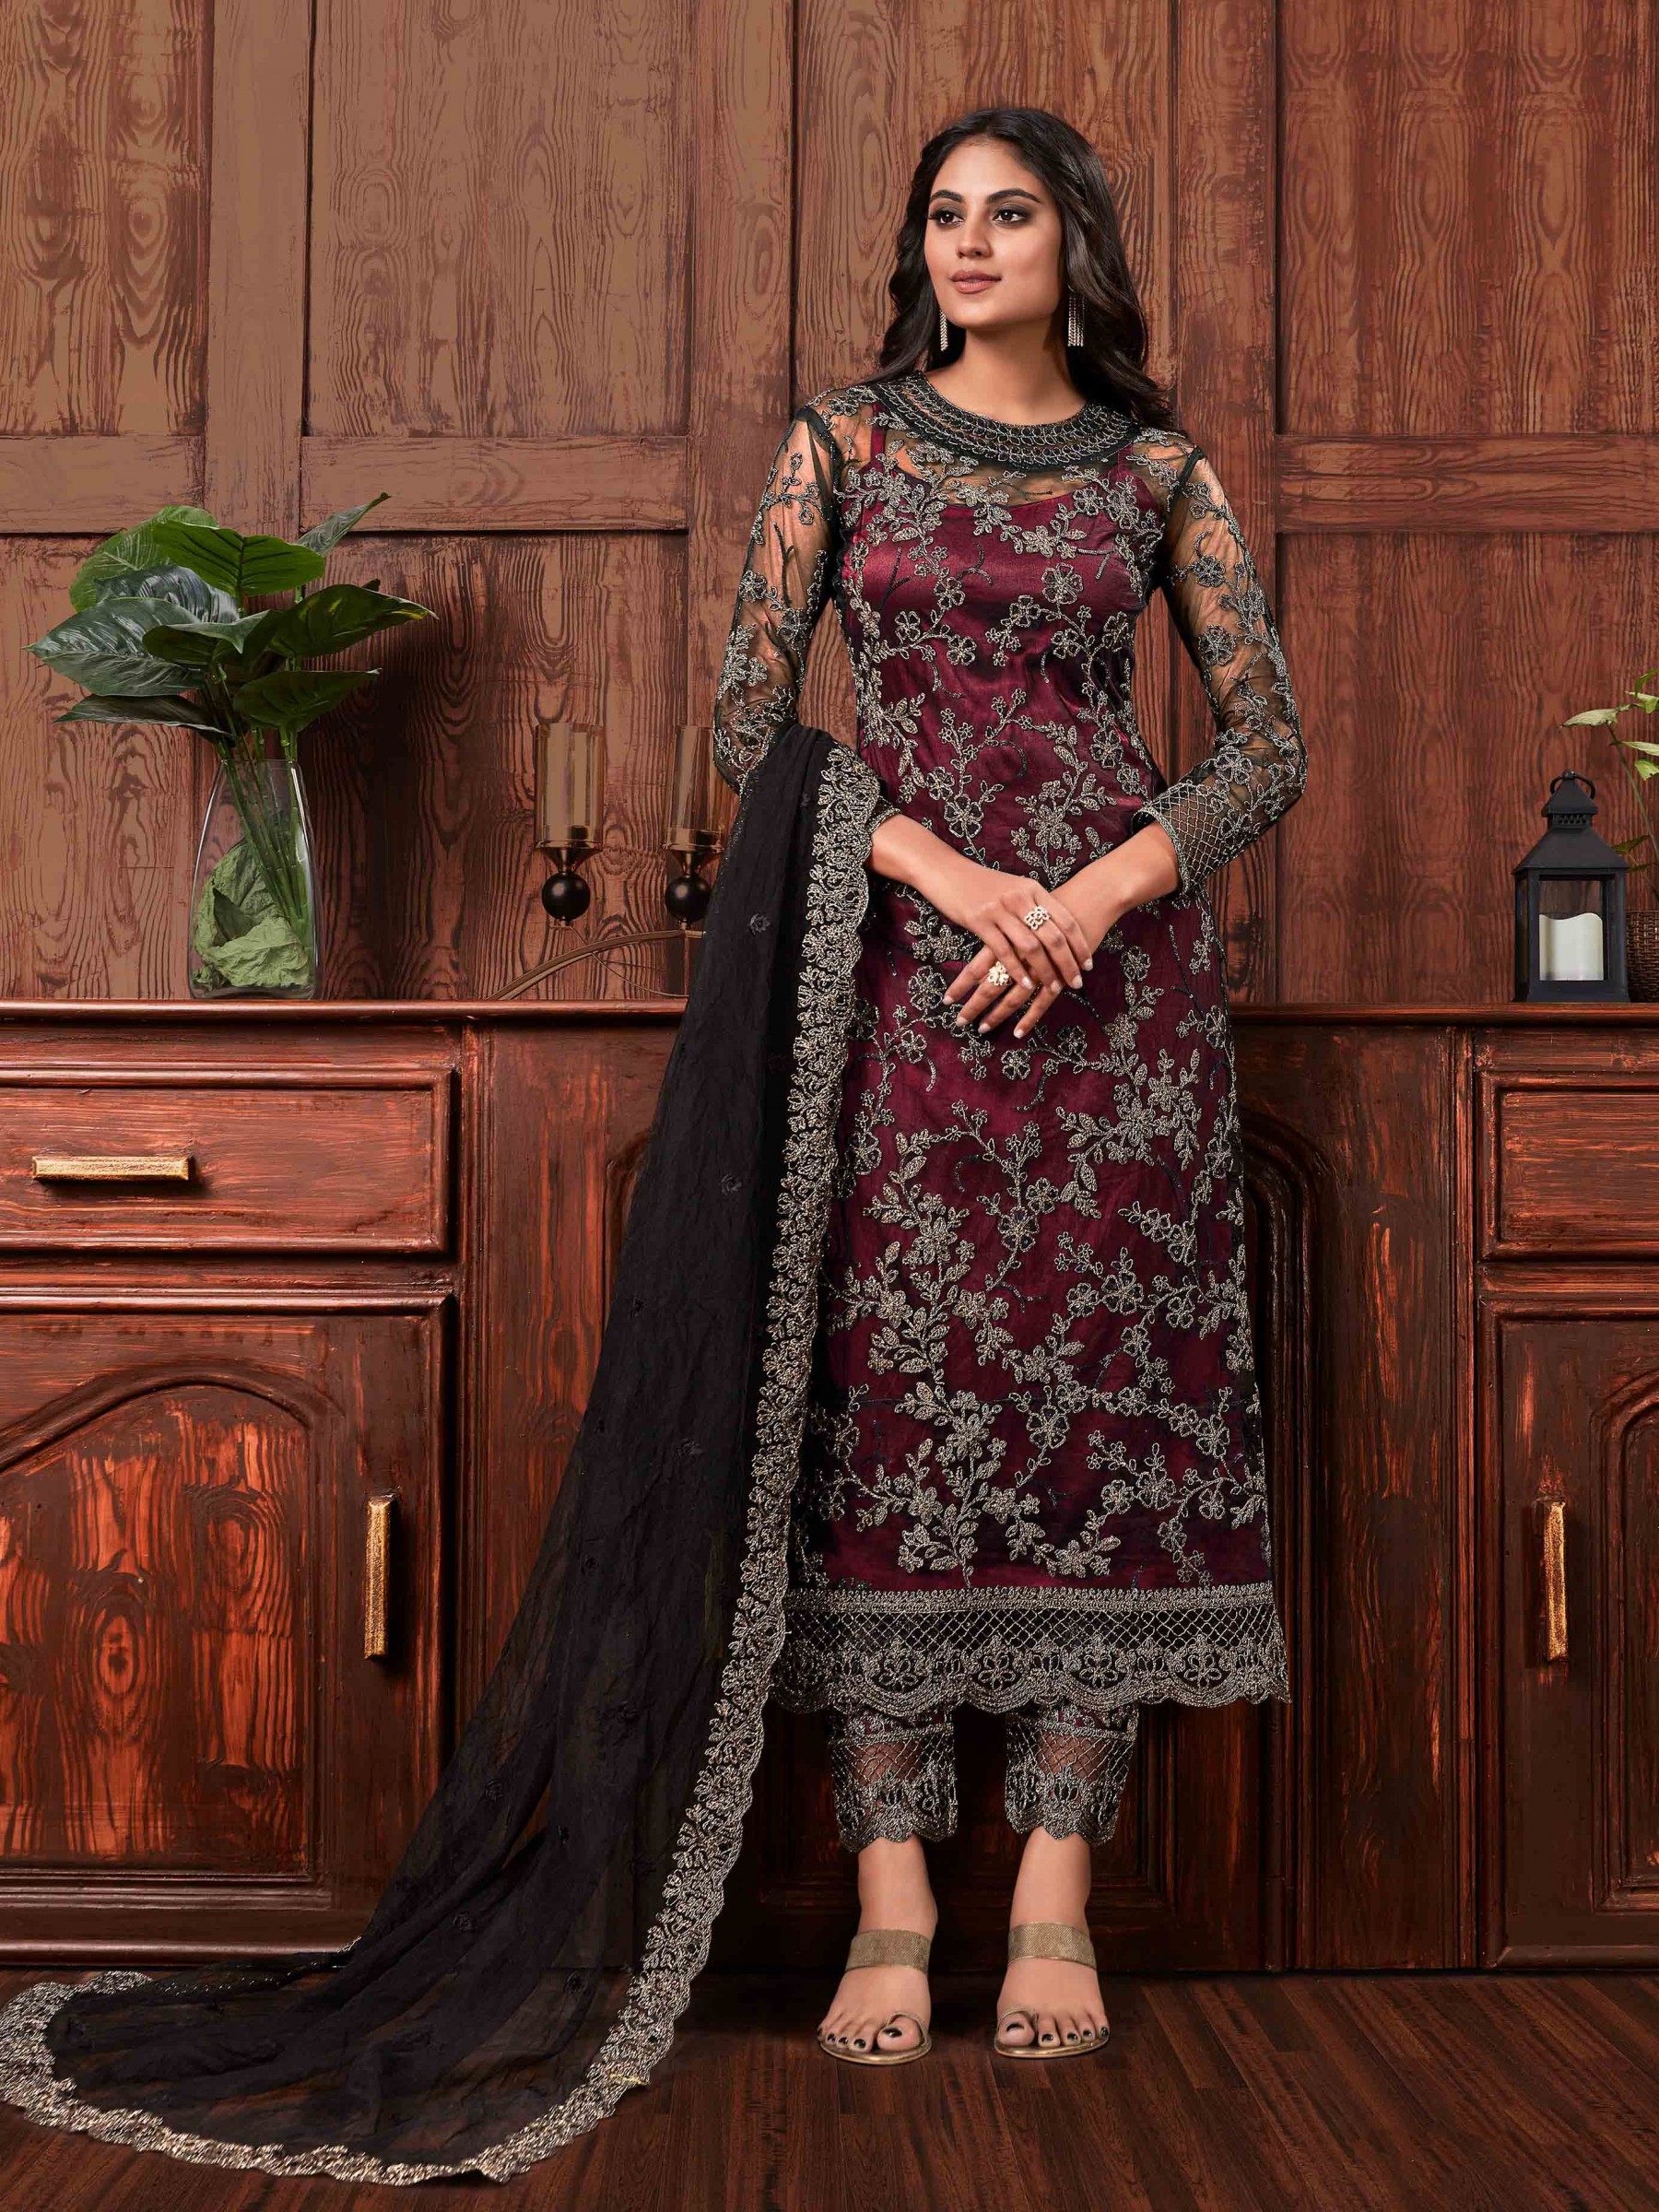 Butterfly Net Fabric Party Wear Readymade Suit In Black & Maroon Color With  Embroidery - Party Wear Salwar Suit - Suits & Sharara